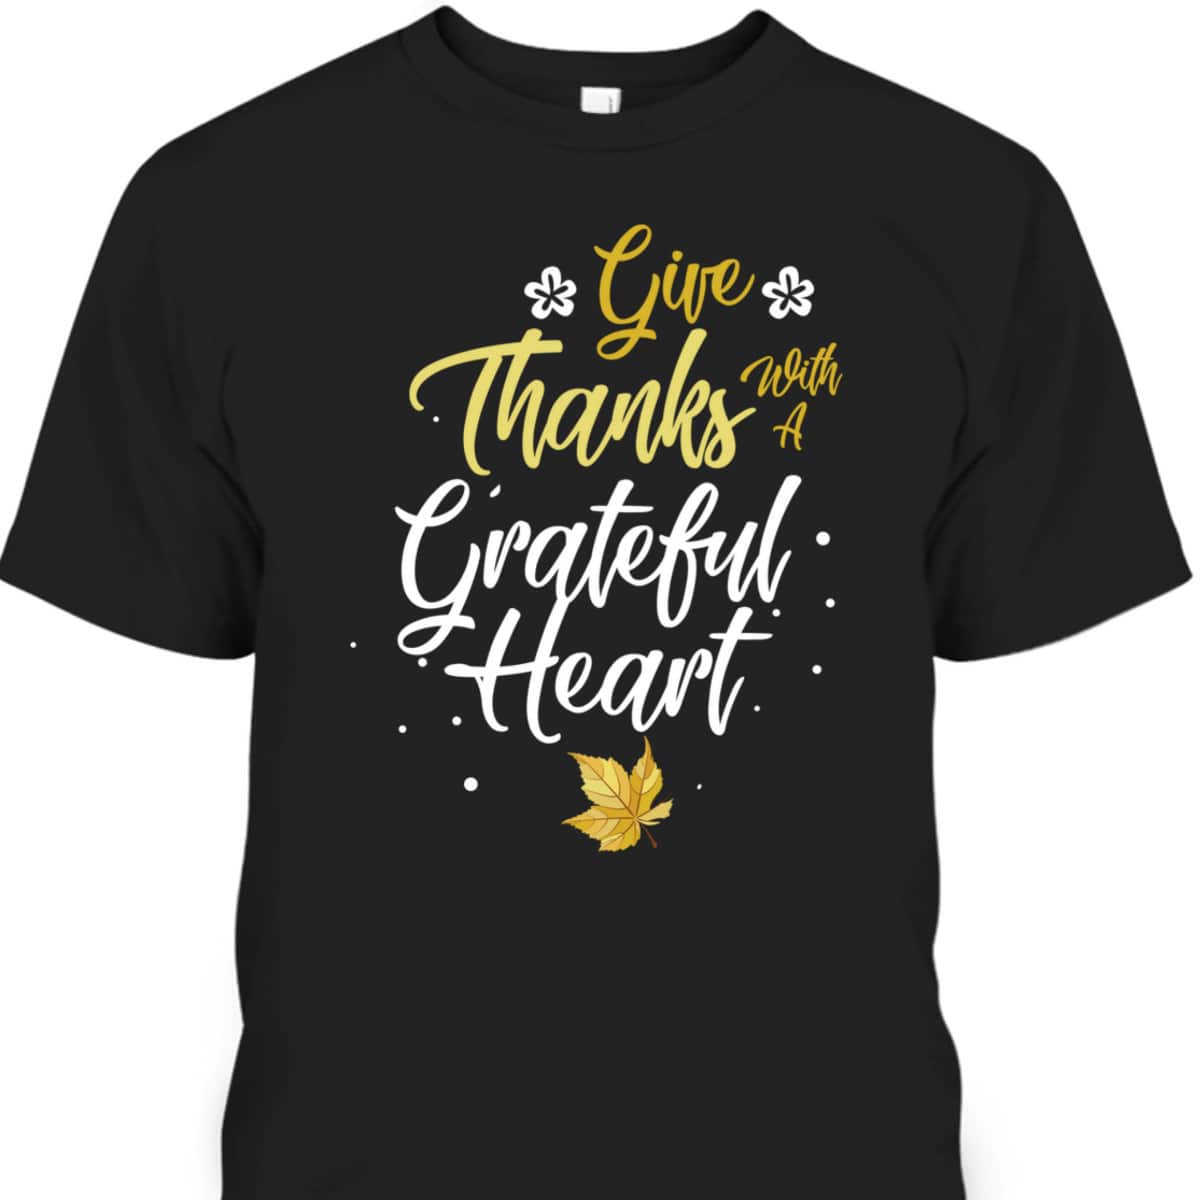 Give Thanks With Grateful Heart Religious Inspiring Christian T-Shirt